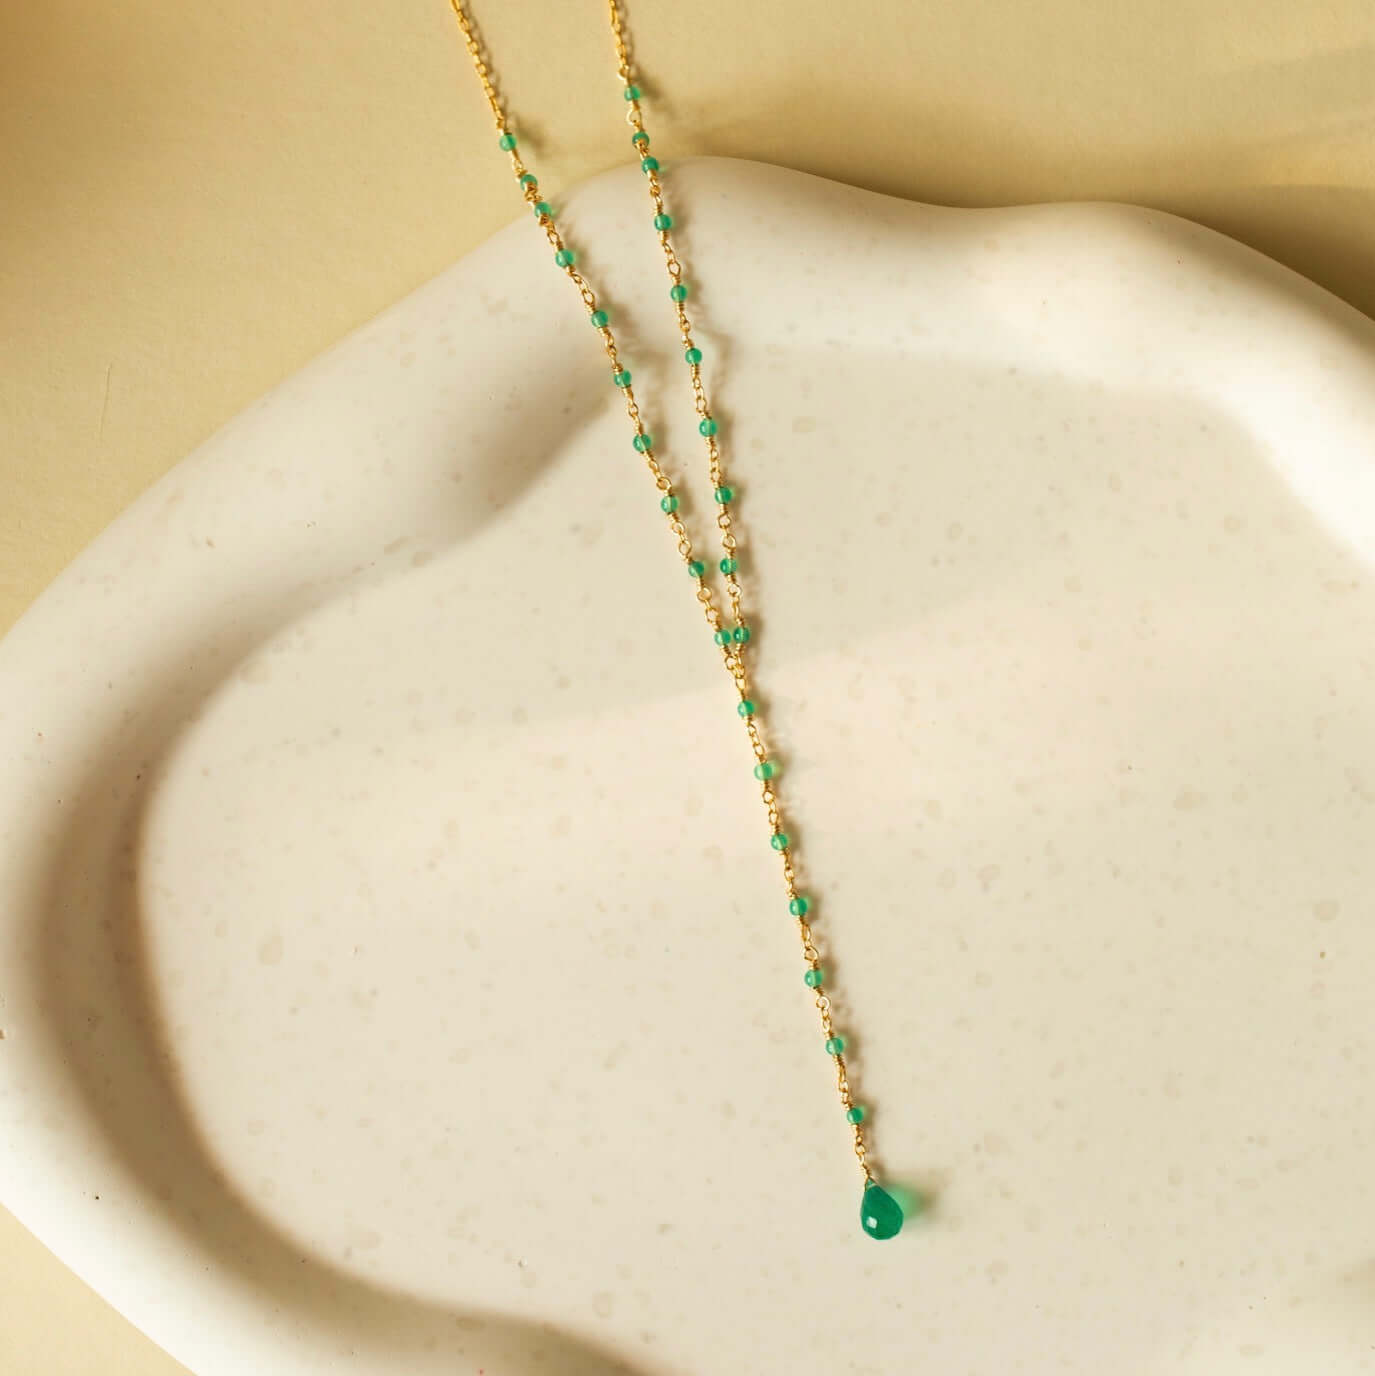 Sophisticated Kensington Collection green onyx necklace in gold.